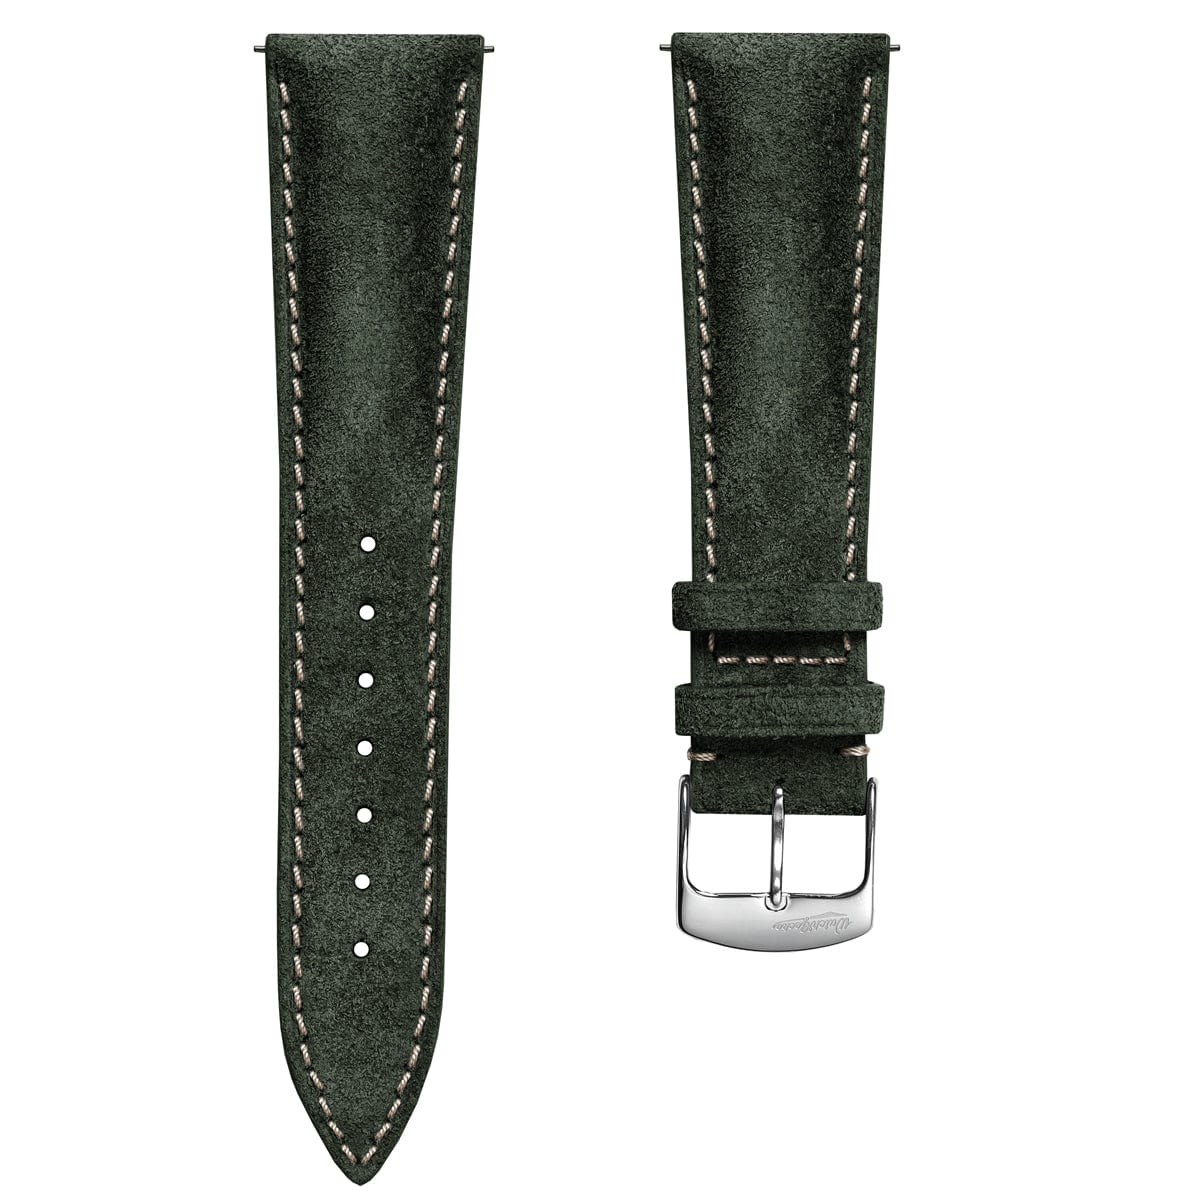 Stanton Conceria Opera Suede Padded Watch Strap - Forest Green